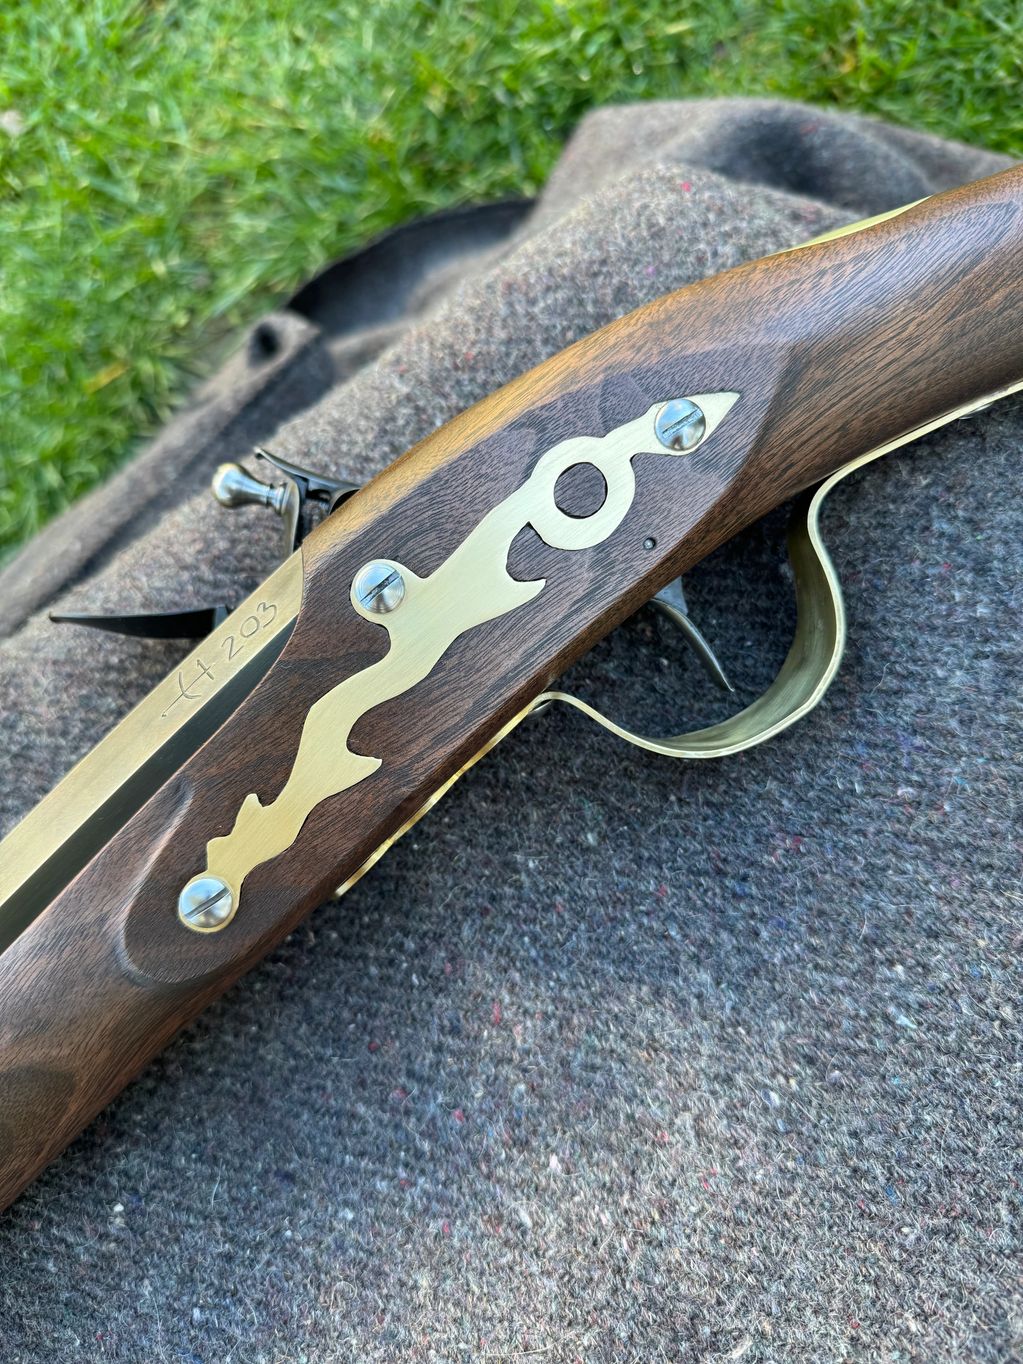 Blunderbuss handmade serpent sideplate.
The side plate can be engraved for an additional fee. Contac